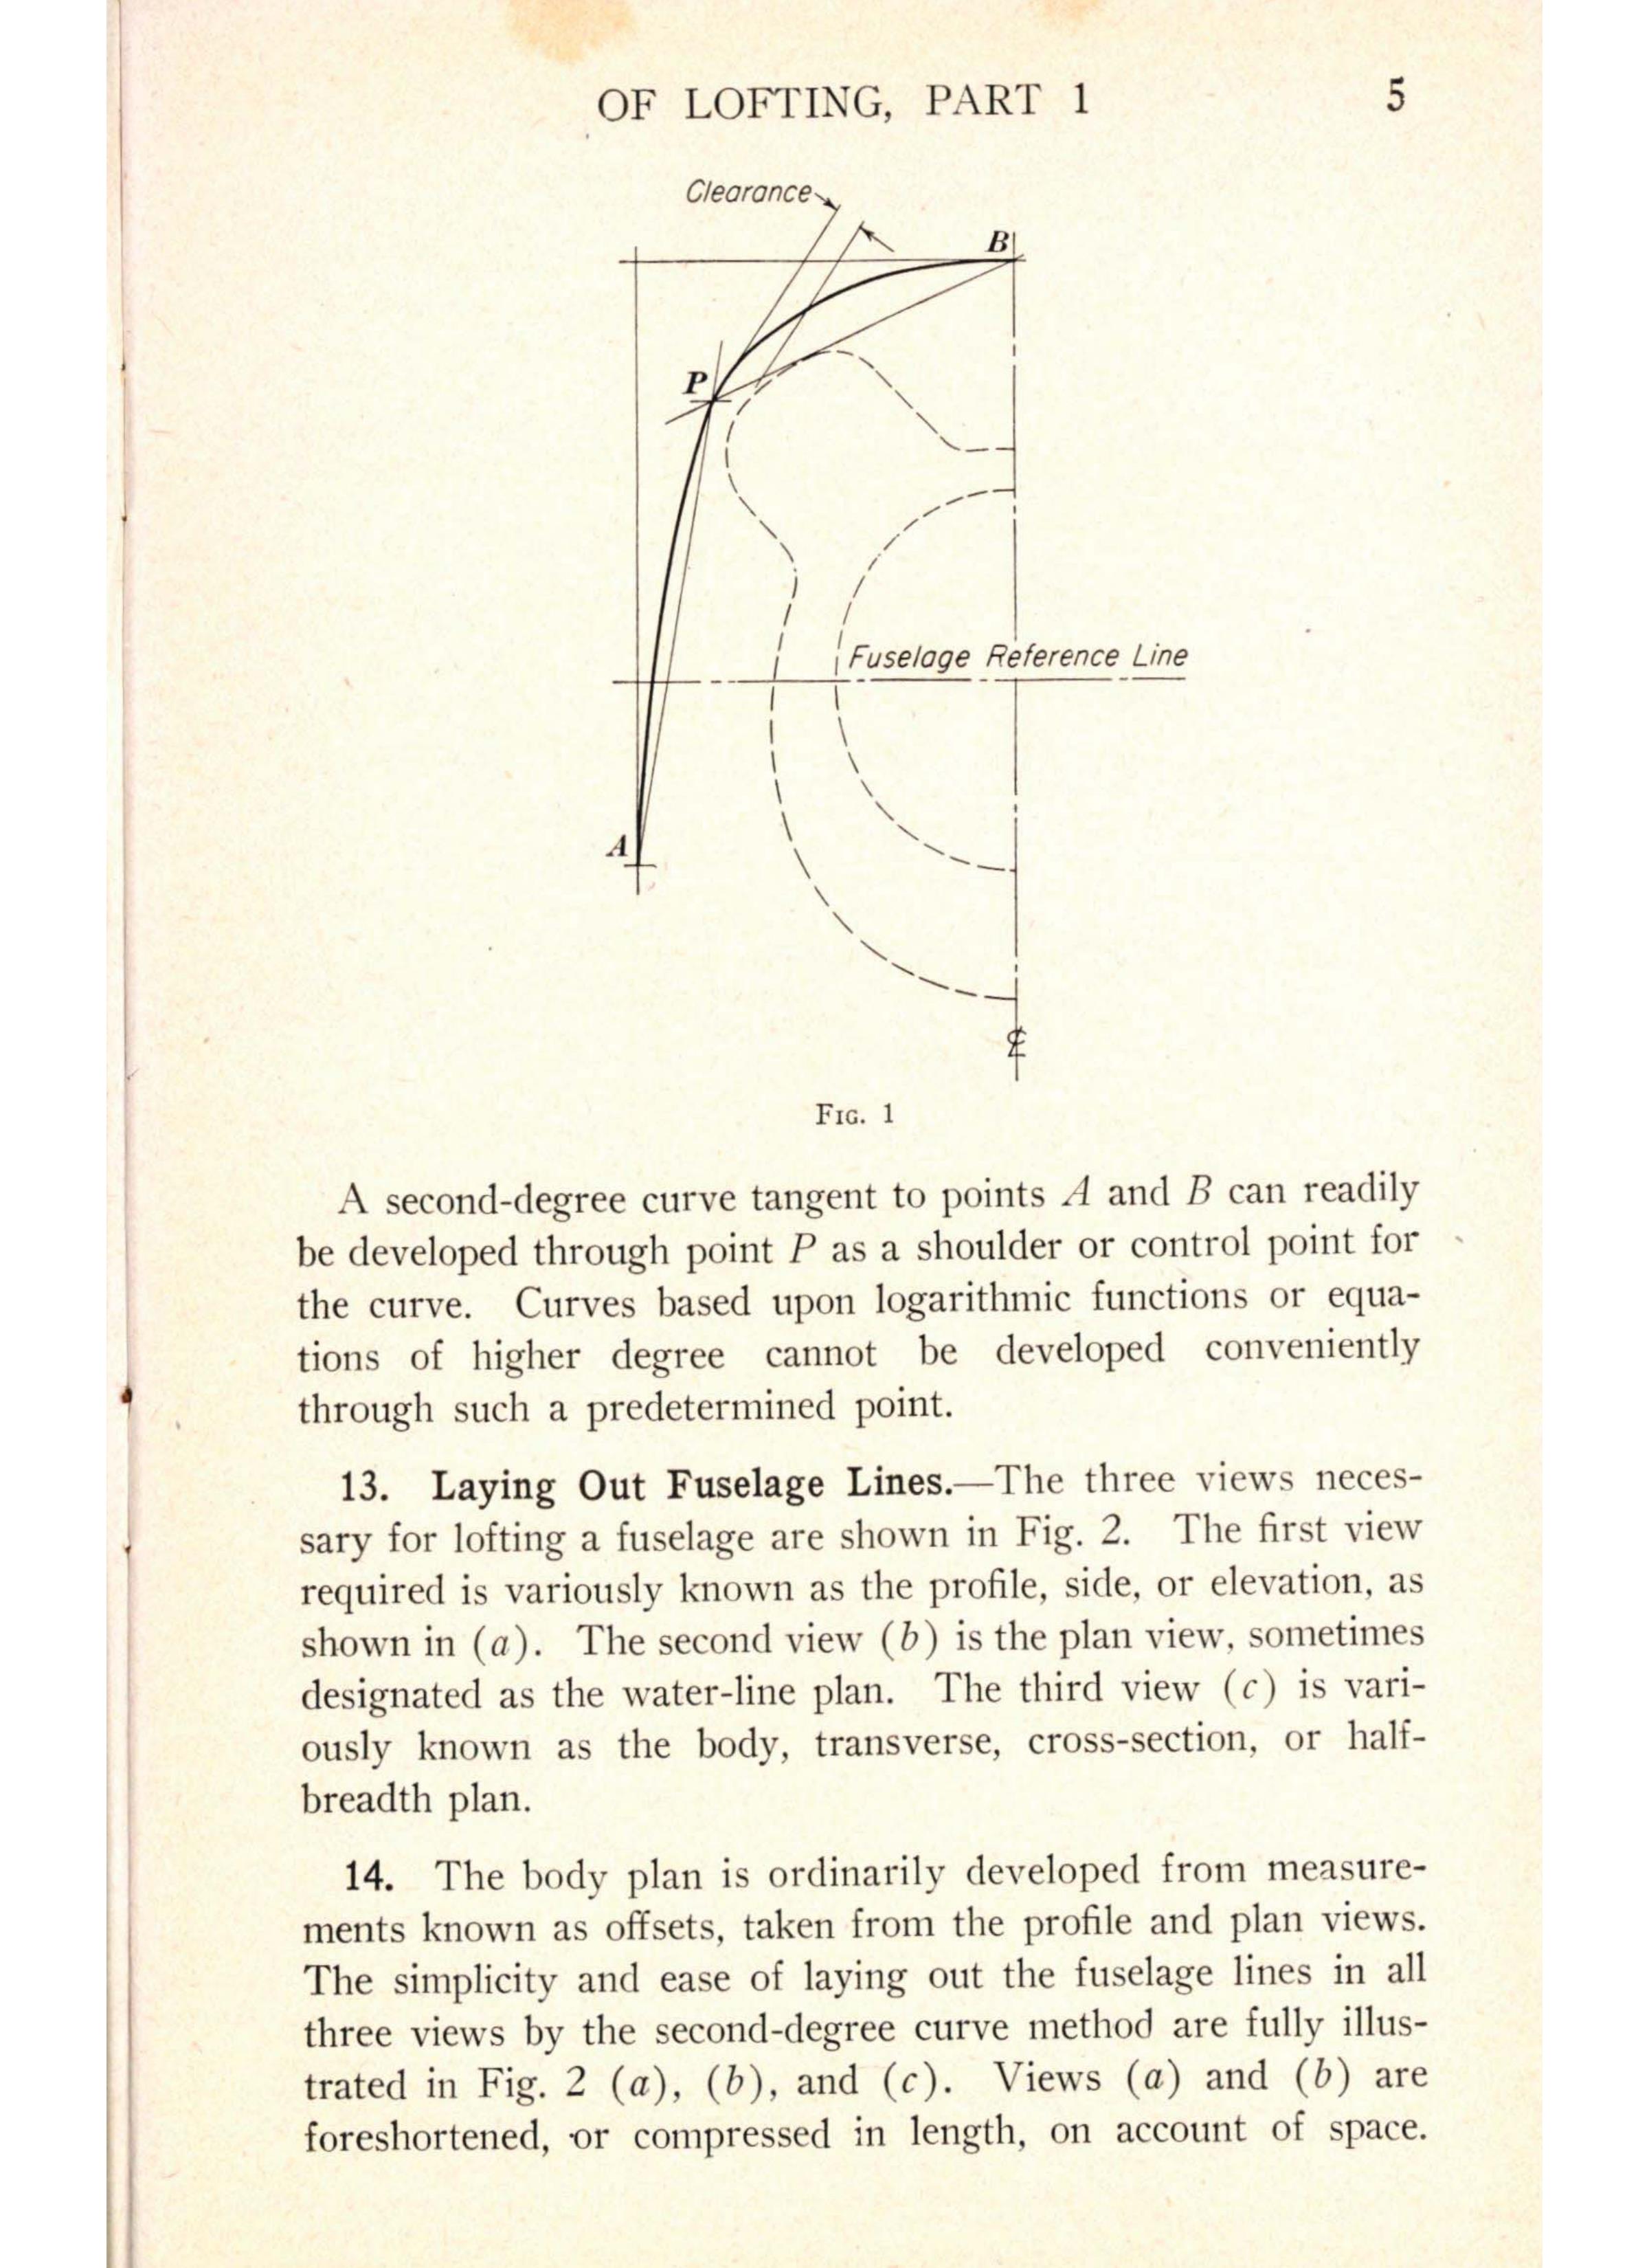 Sample page 7 from AirCorps Library document: Mathmatical Technique of Lofting - Part 1 - Bureau of Aeronautics